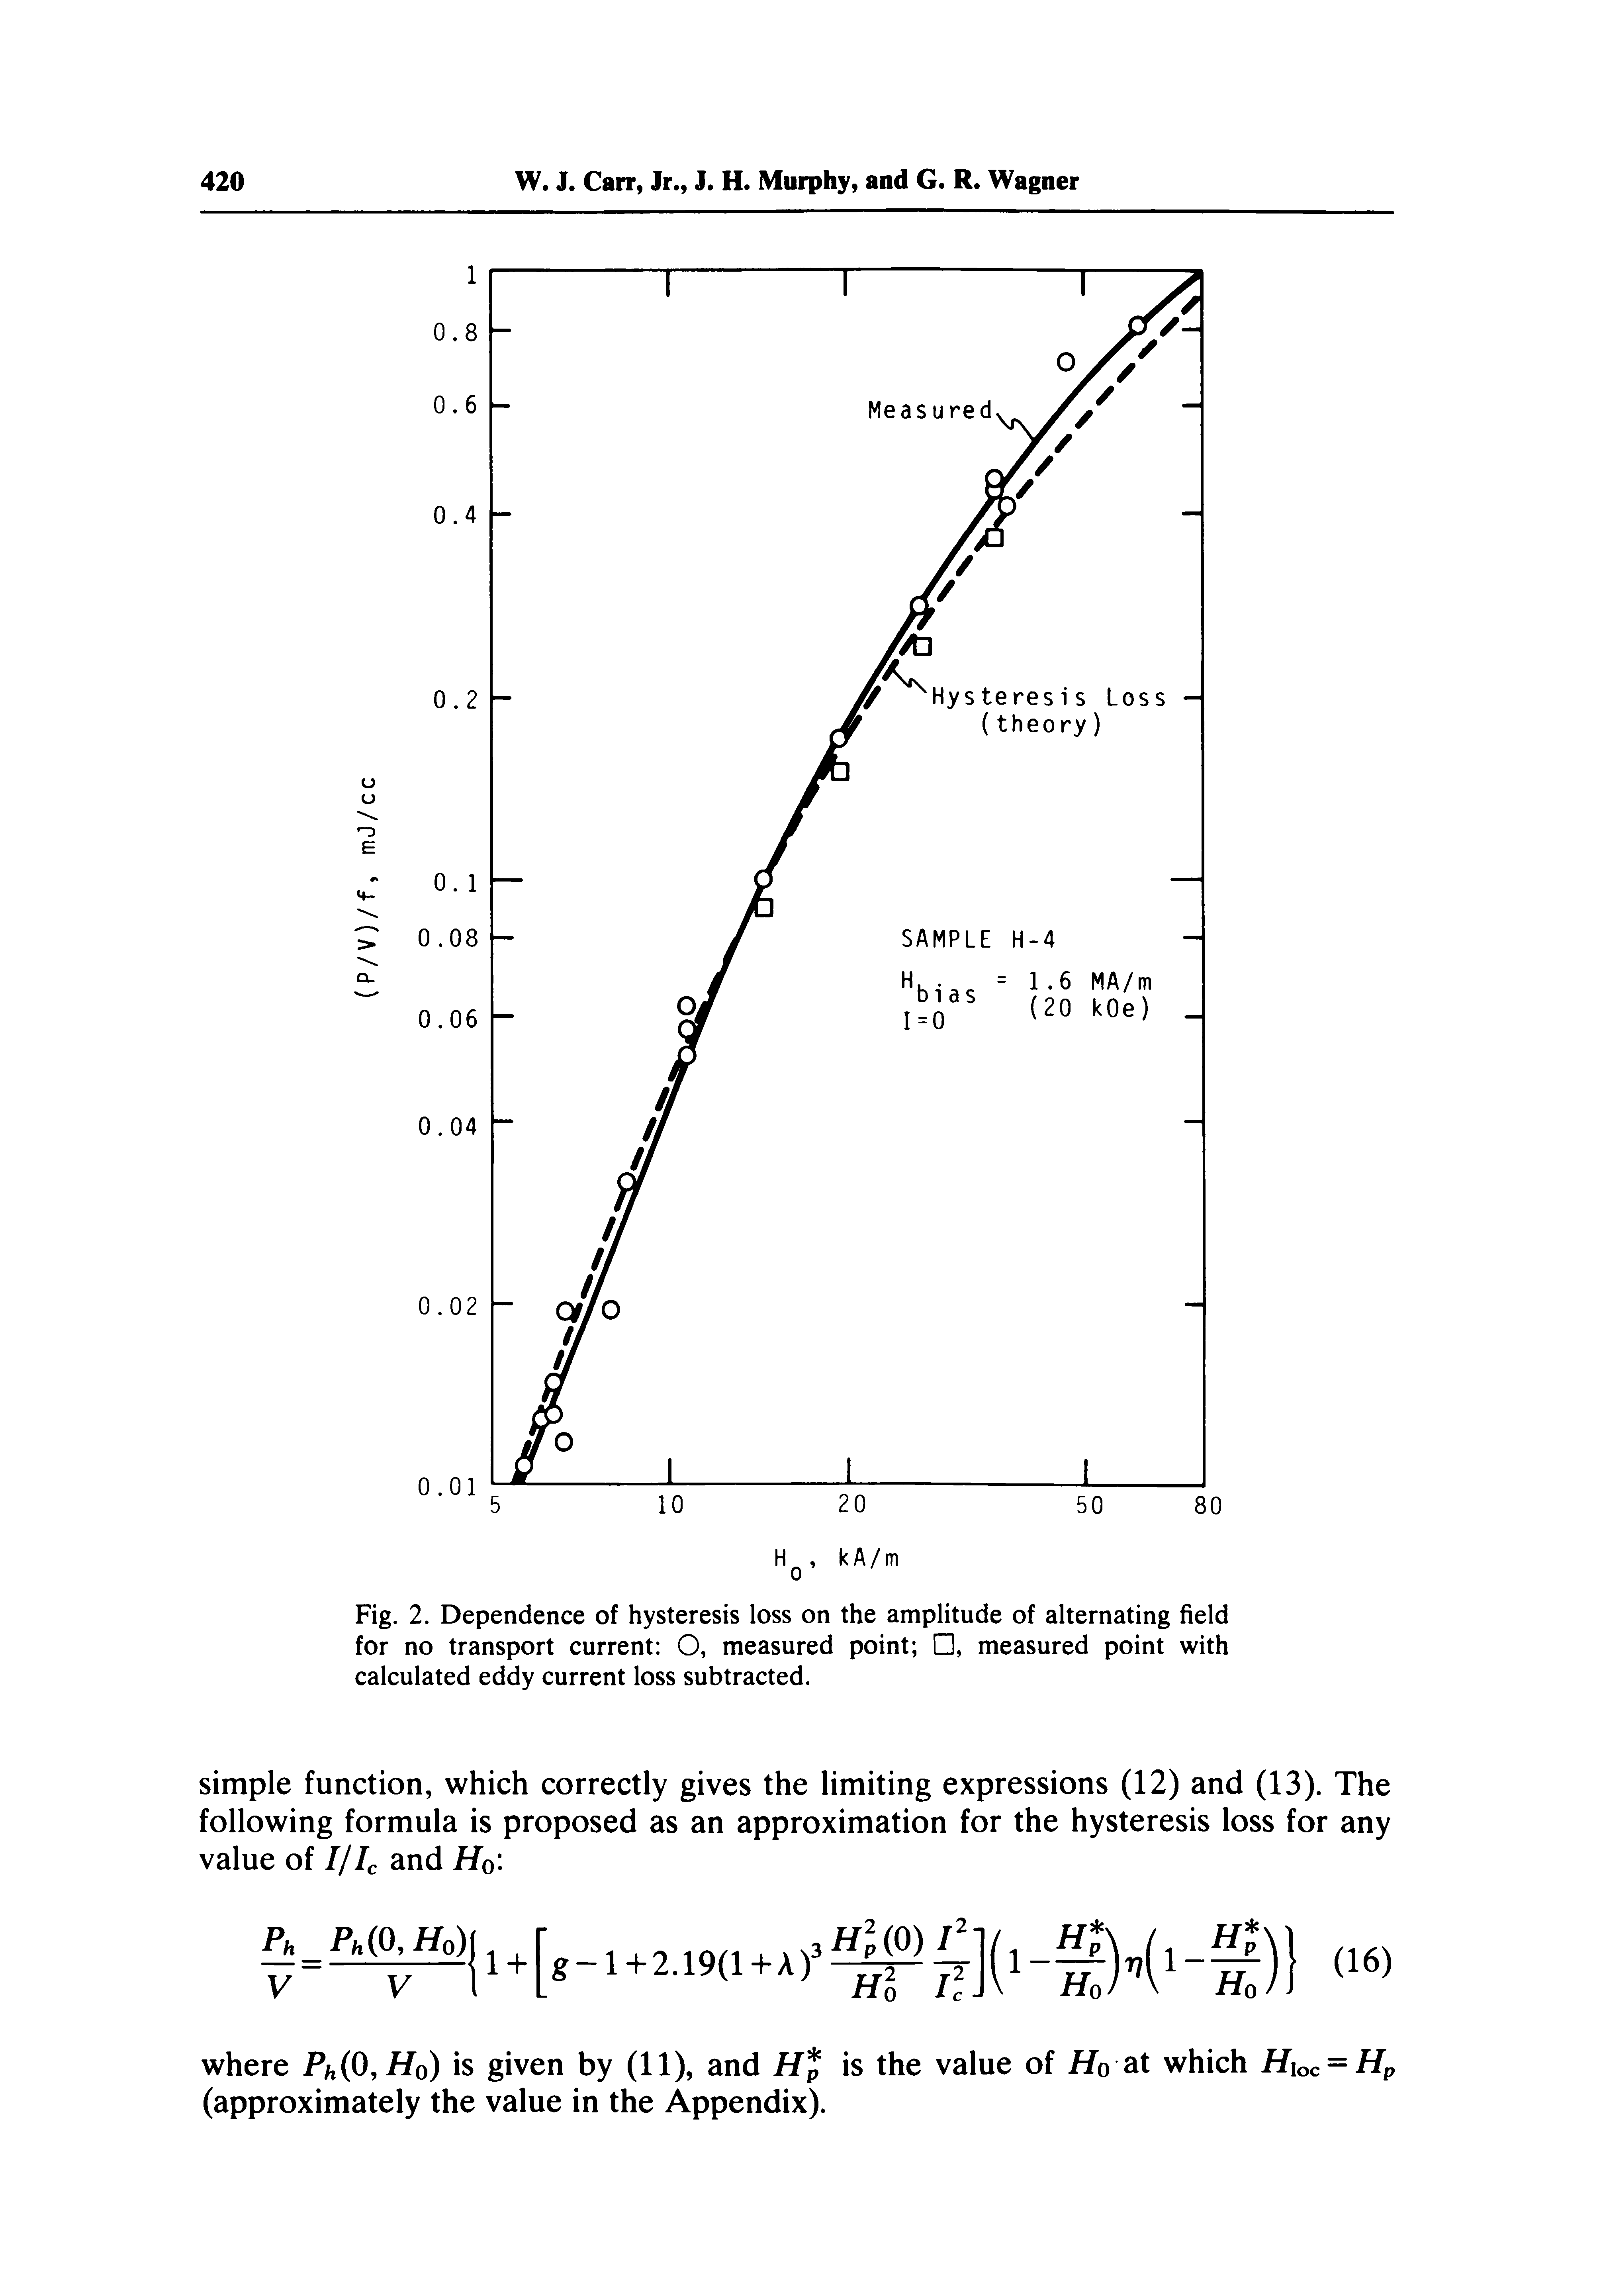 Fig. 2. Dependence of hysteresis loss on the amplitude of alternating field for no transport current O, measured point , measured point with calculated eddy current loss subtracted.